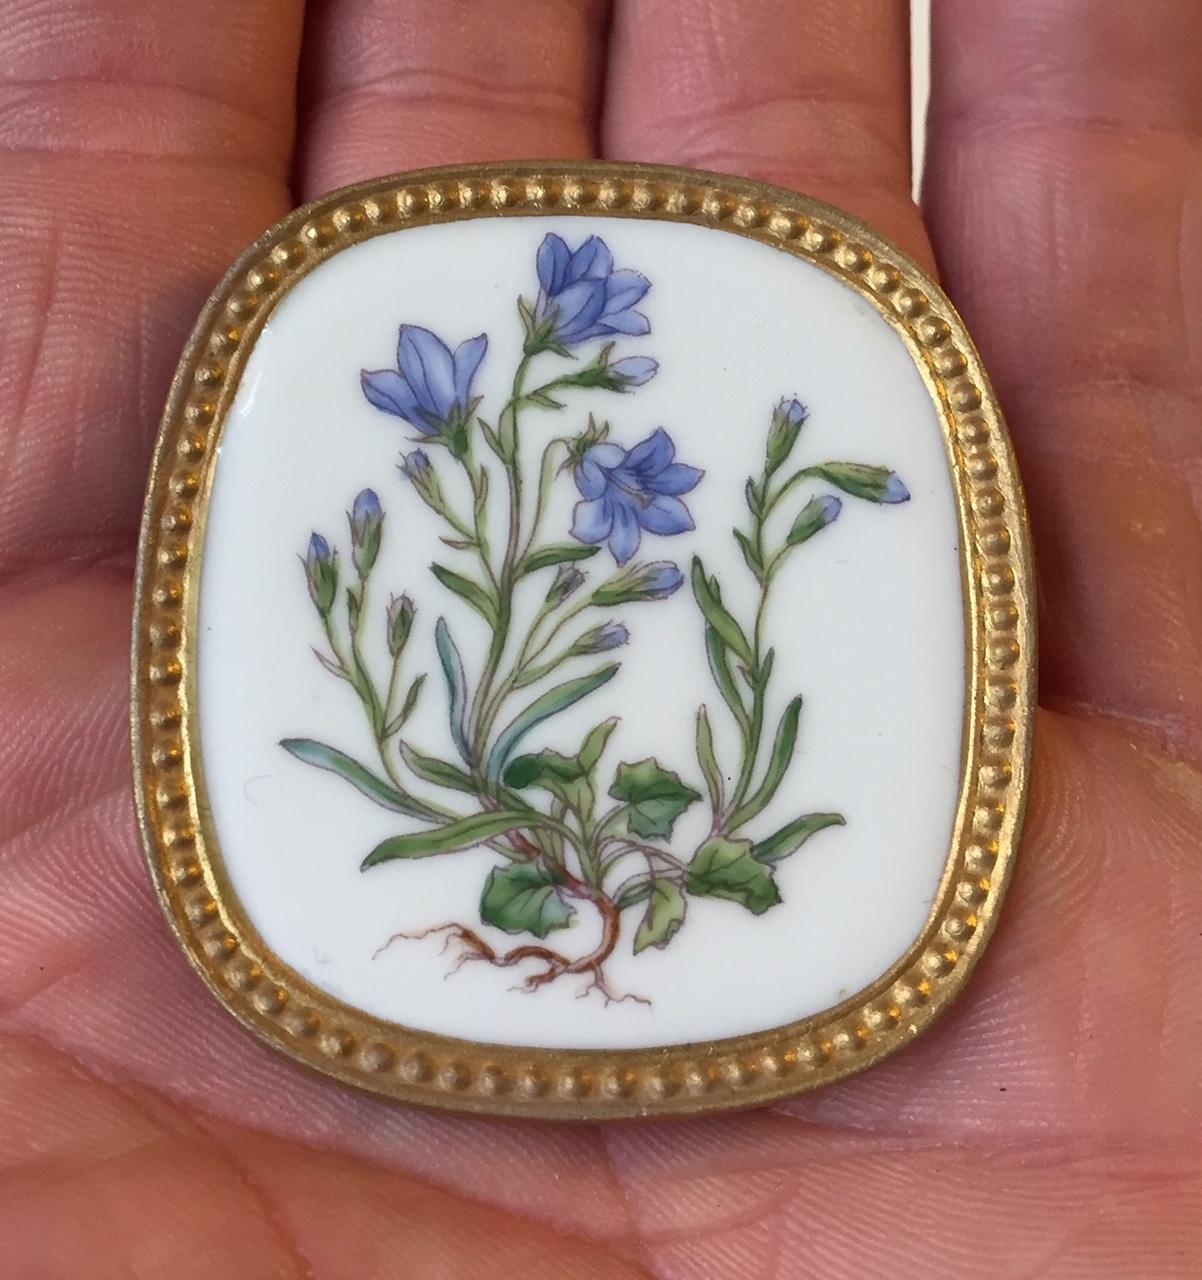 A Flora Danica brooch or pendant of porcelain, with gilded and sterling silver made by Anton Michelsen, and Royal Copenhagen, Denmark. Measures: H 4.8 cm. W 4.6 cm. Fully hallmarked to the backside.